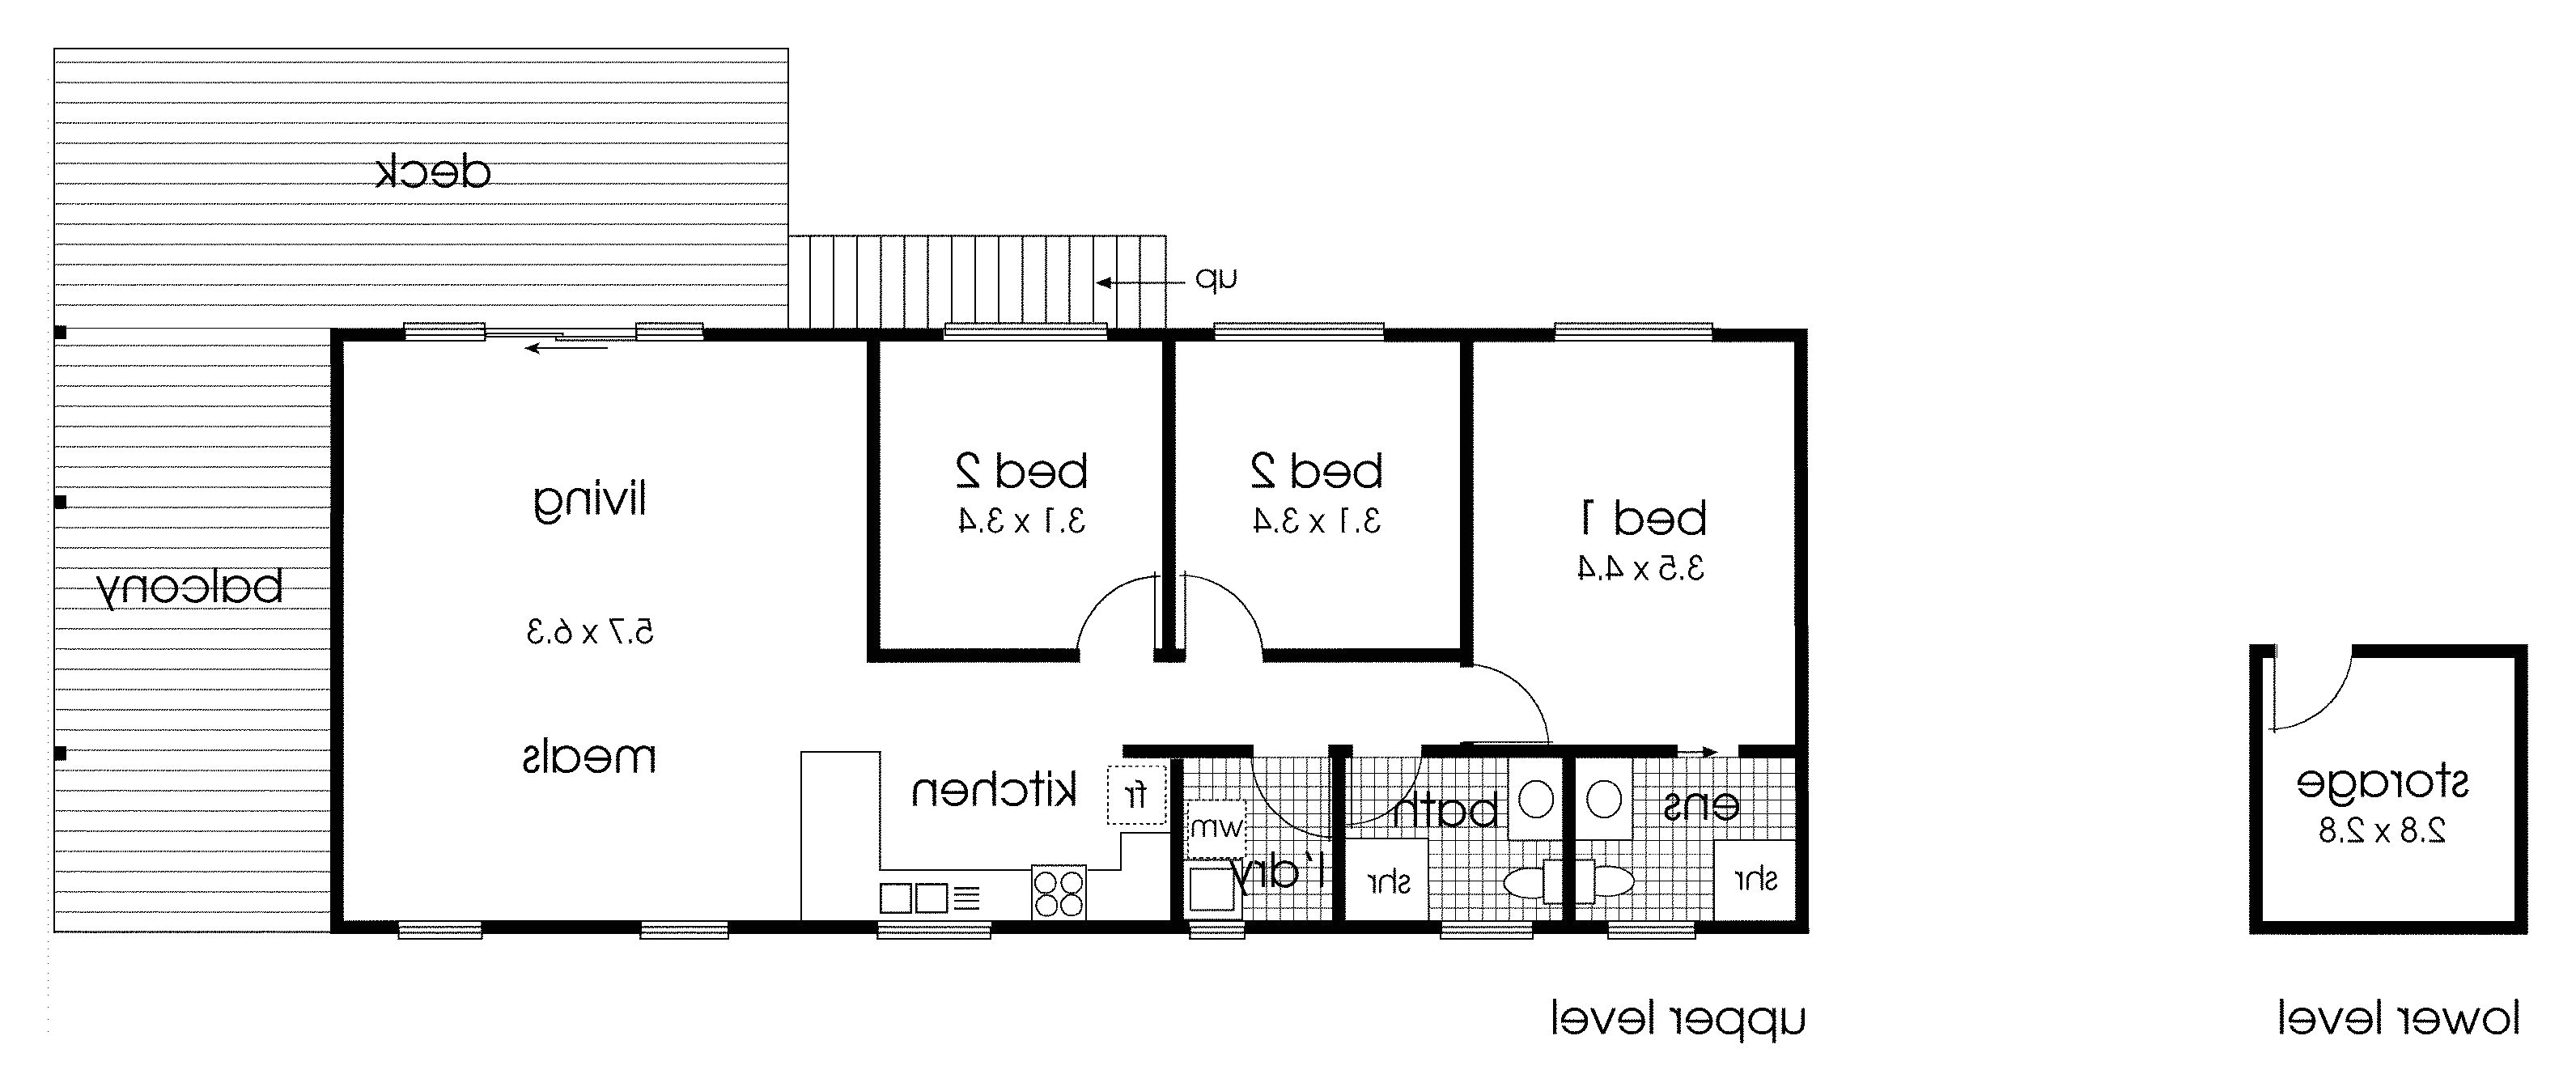 loft floor plans tiny house design with loft awesome small house plans fresh design